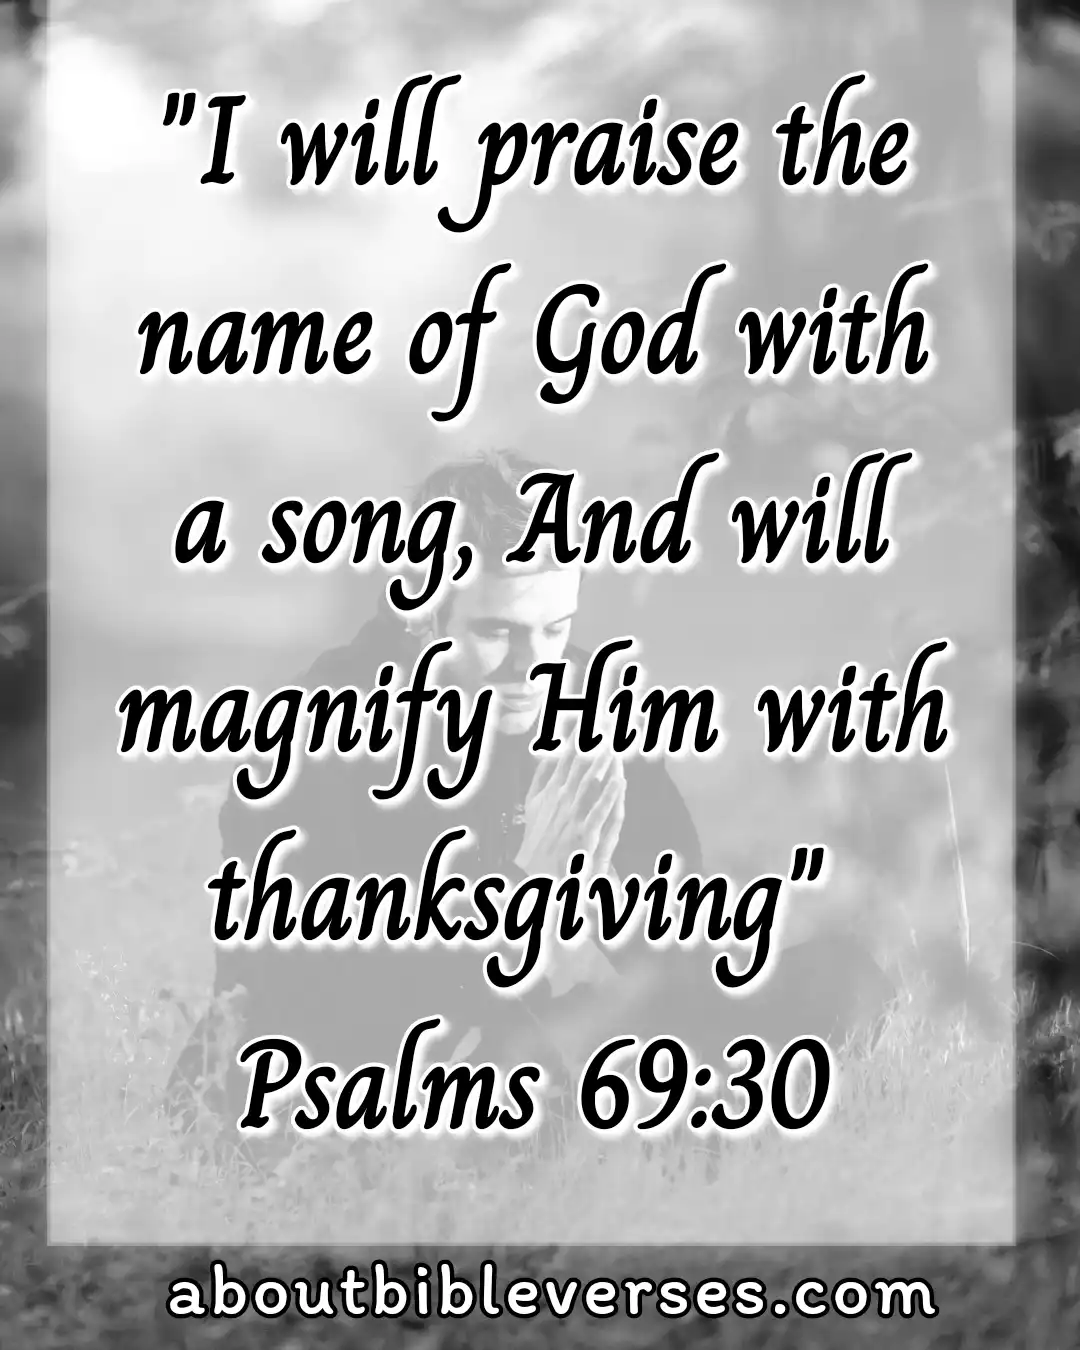 Bible Verses About Giving Thanks To God (Psalm 69:30)